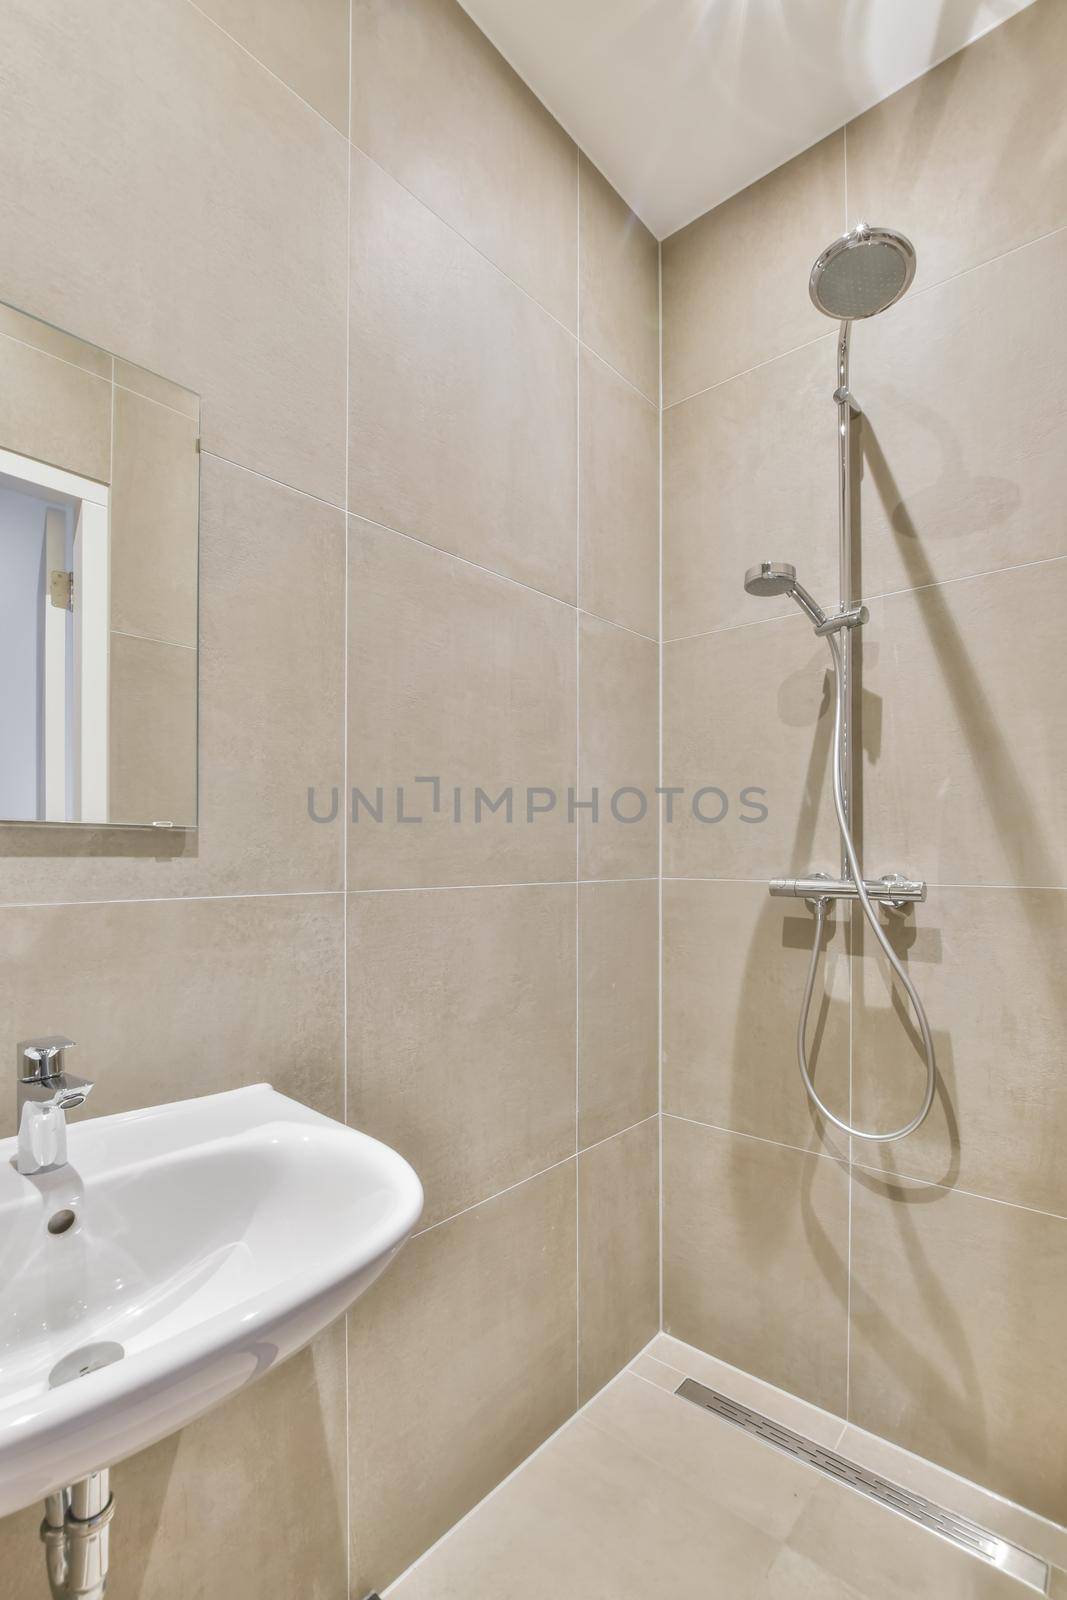 The interior of the bathroom is covered with beige tiles by casamedia